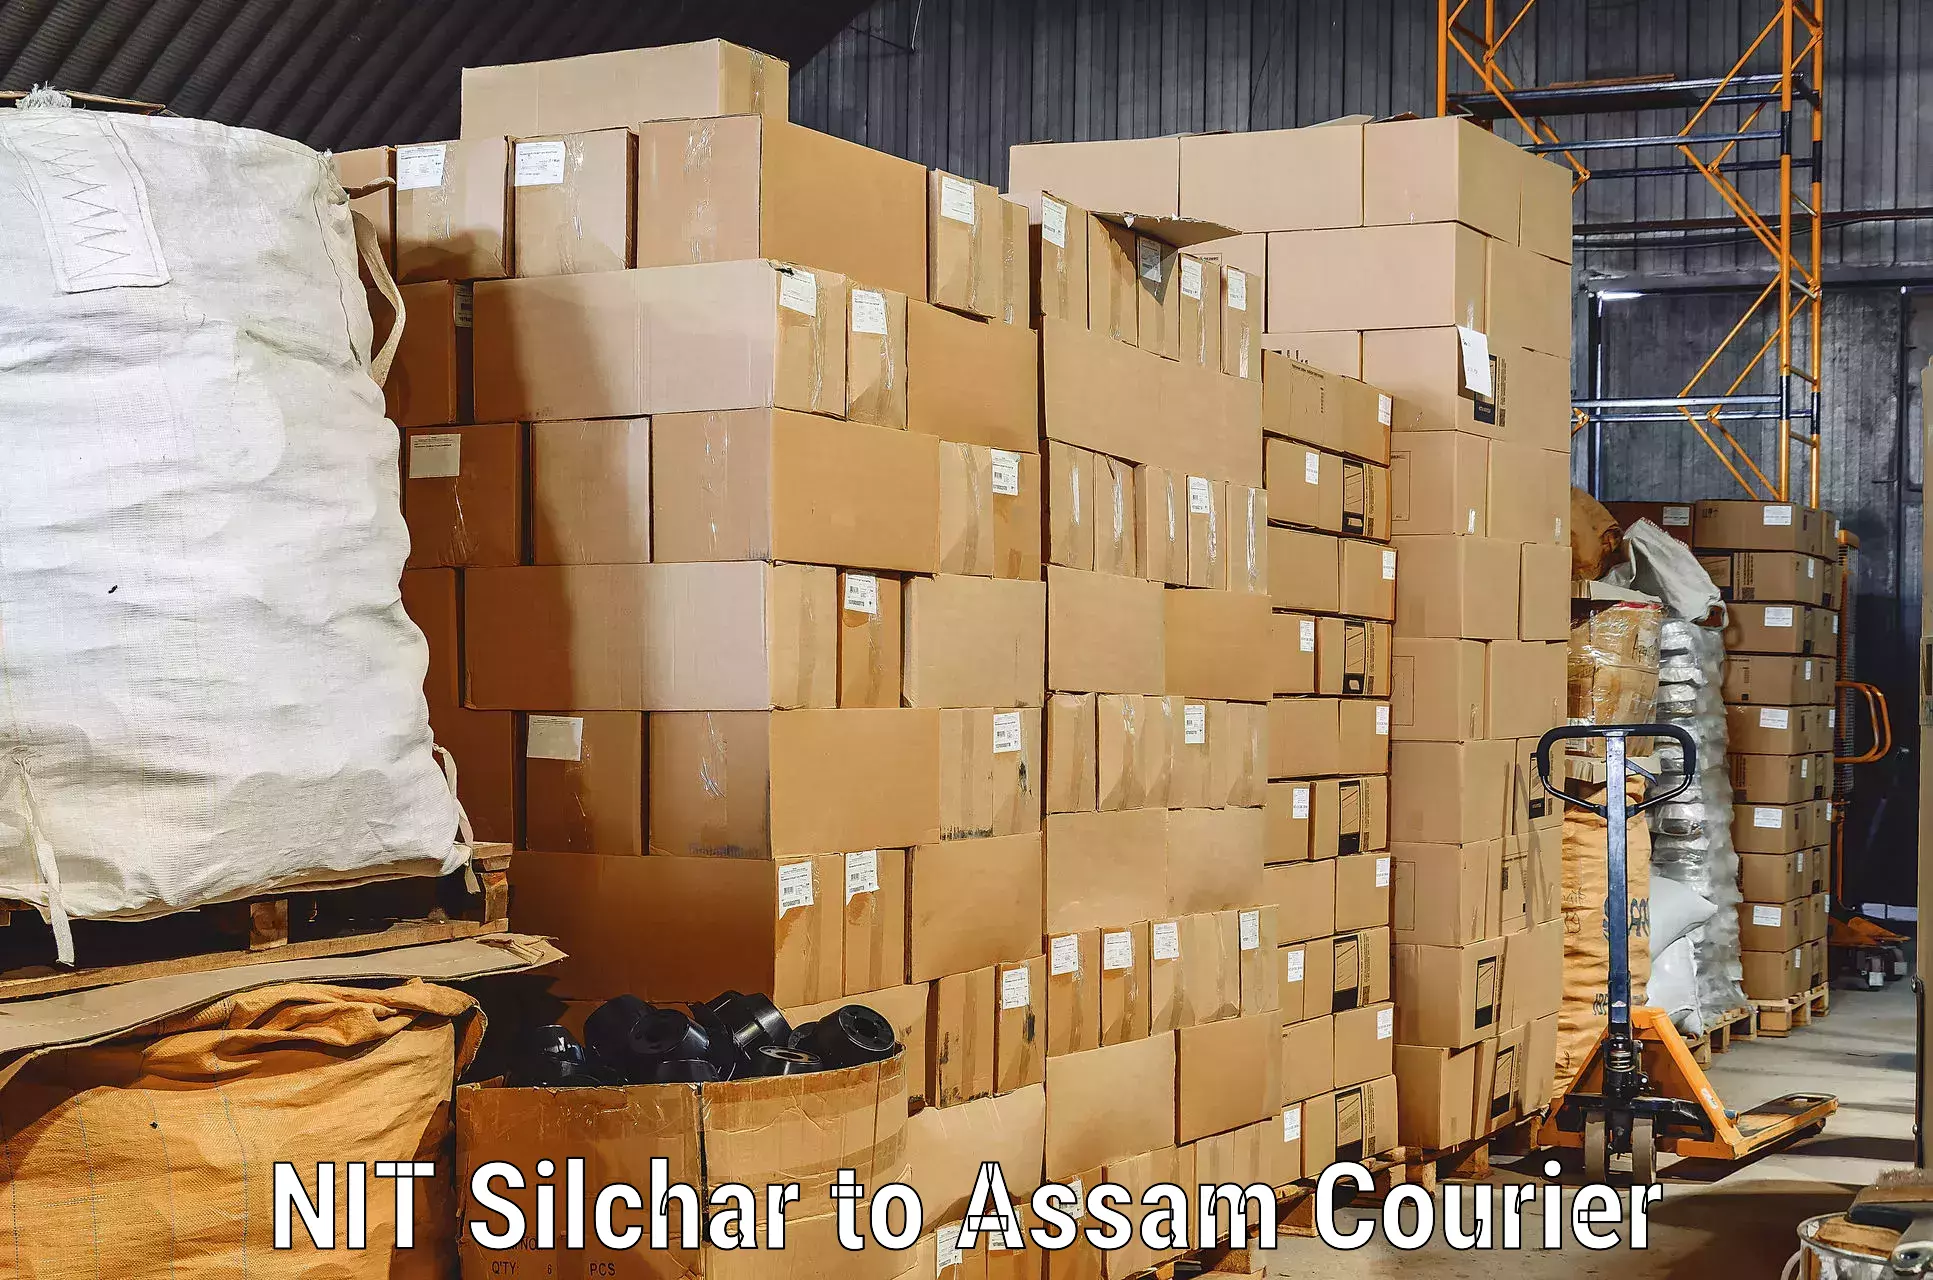 Moving and packing experts NIT Silchar to Lala Assam